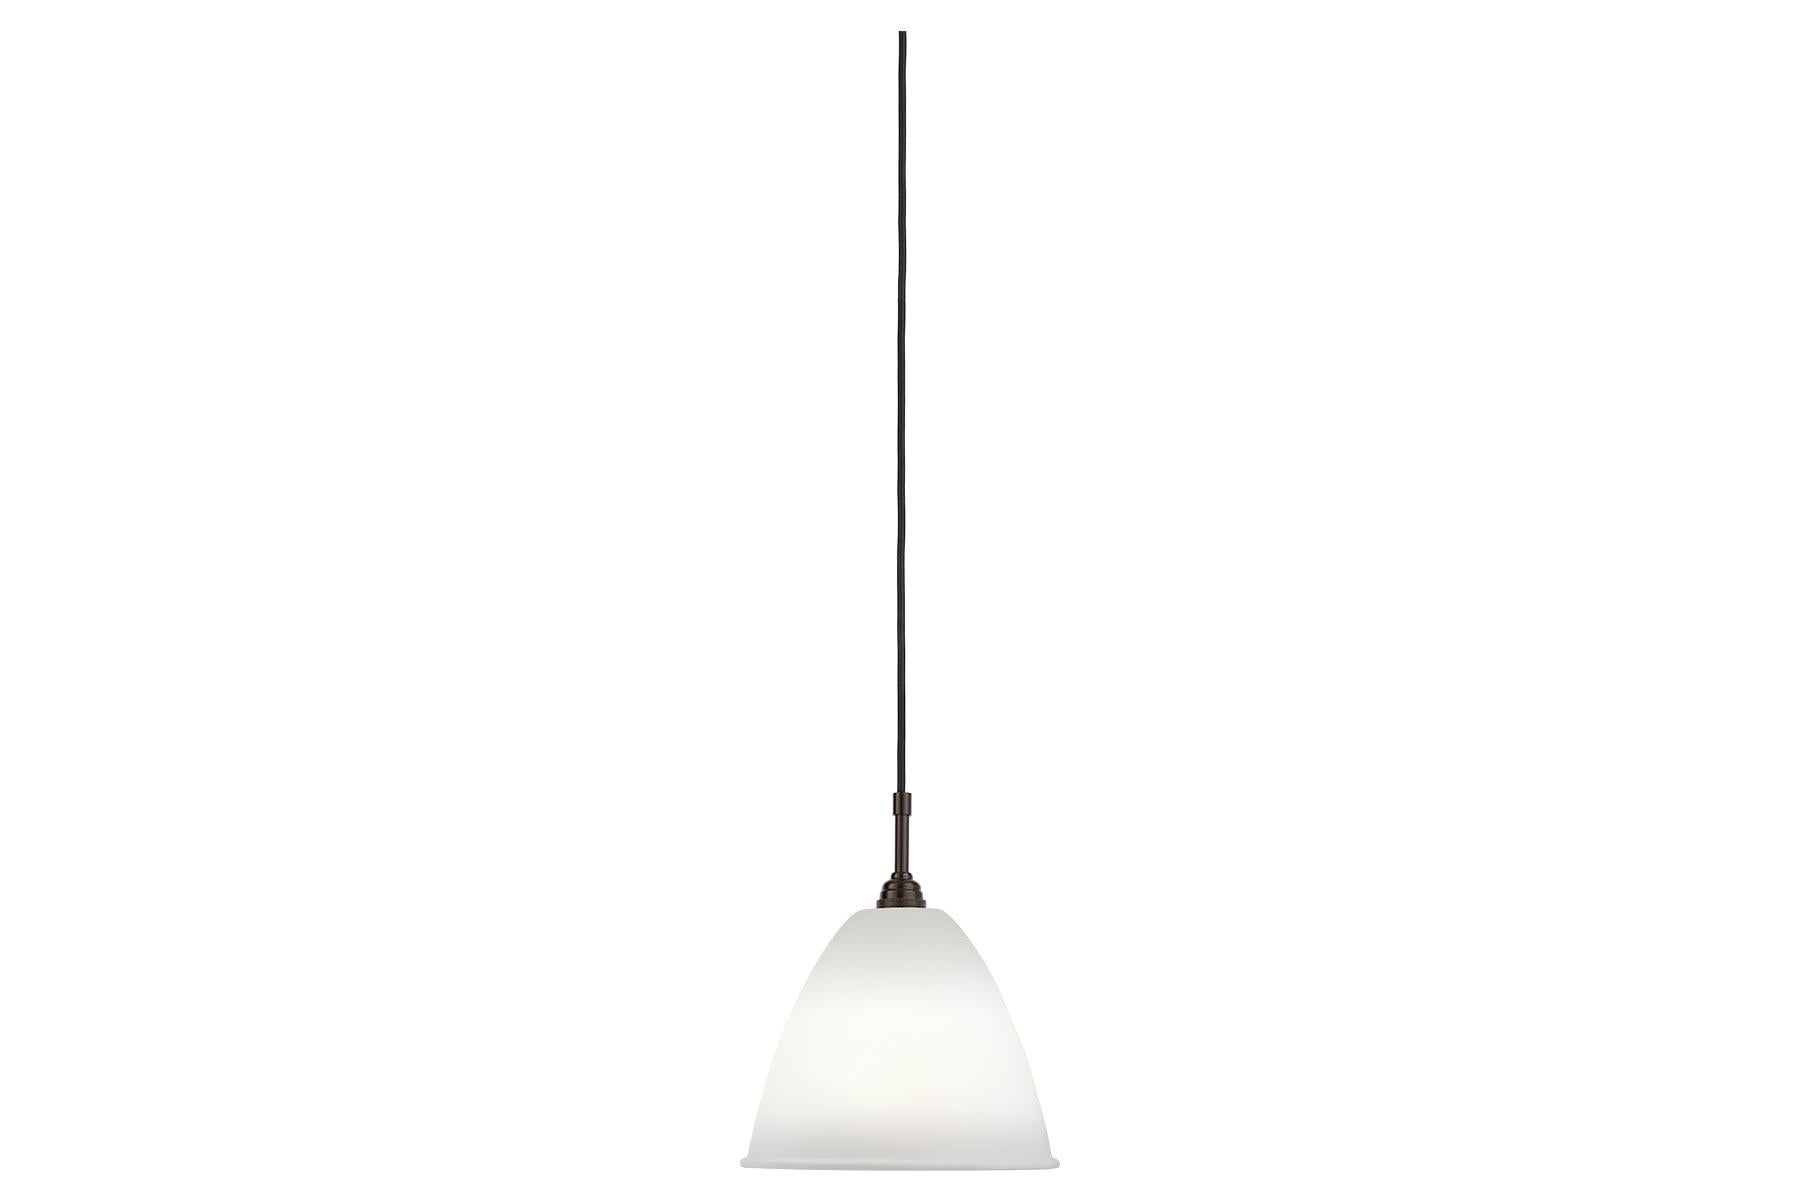 The Bestlite BL9 Pendant in four sizes and in a numerous of finishes was designed in 1930 by the Bauhaus influenced British designer Robert Dudley best. With its great heritage and contemporary look, the BL9 Pendant is a coveted design worldwide.